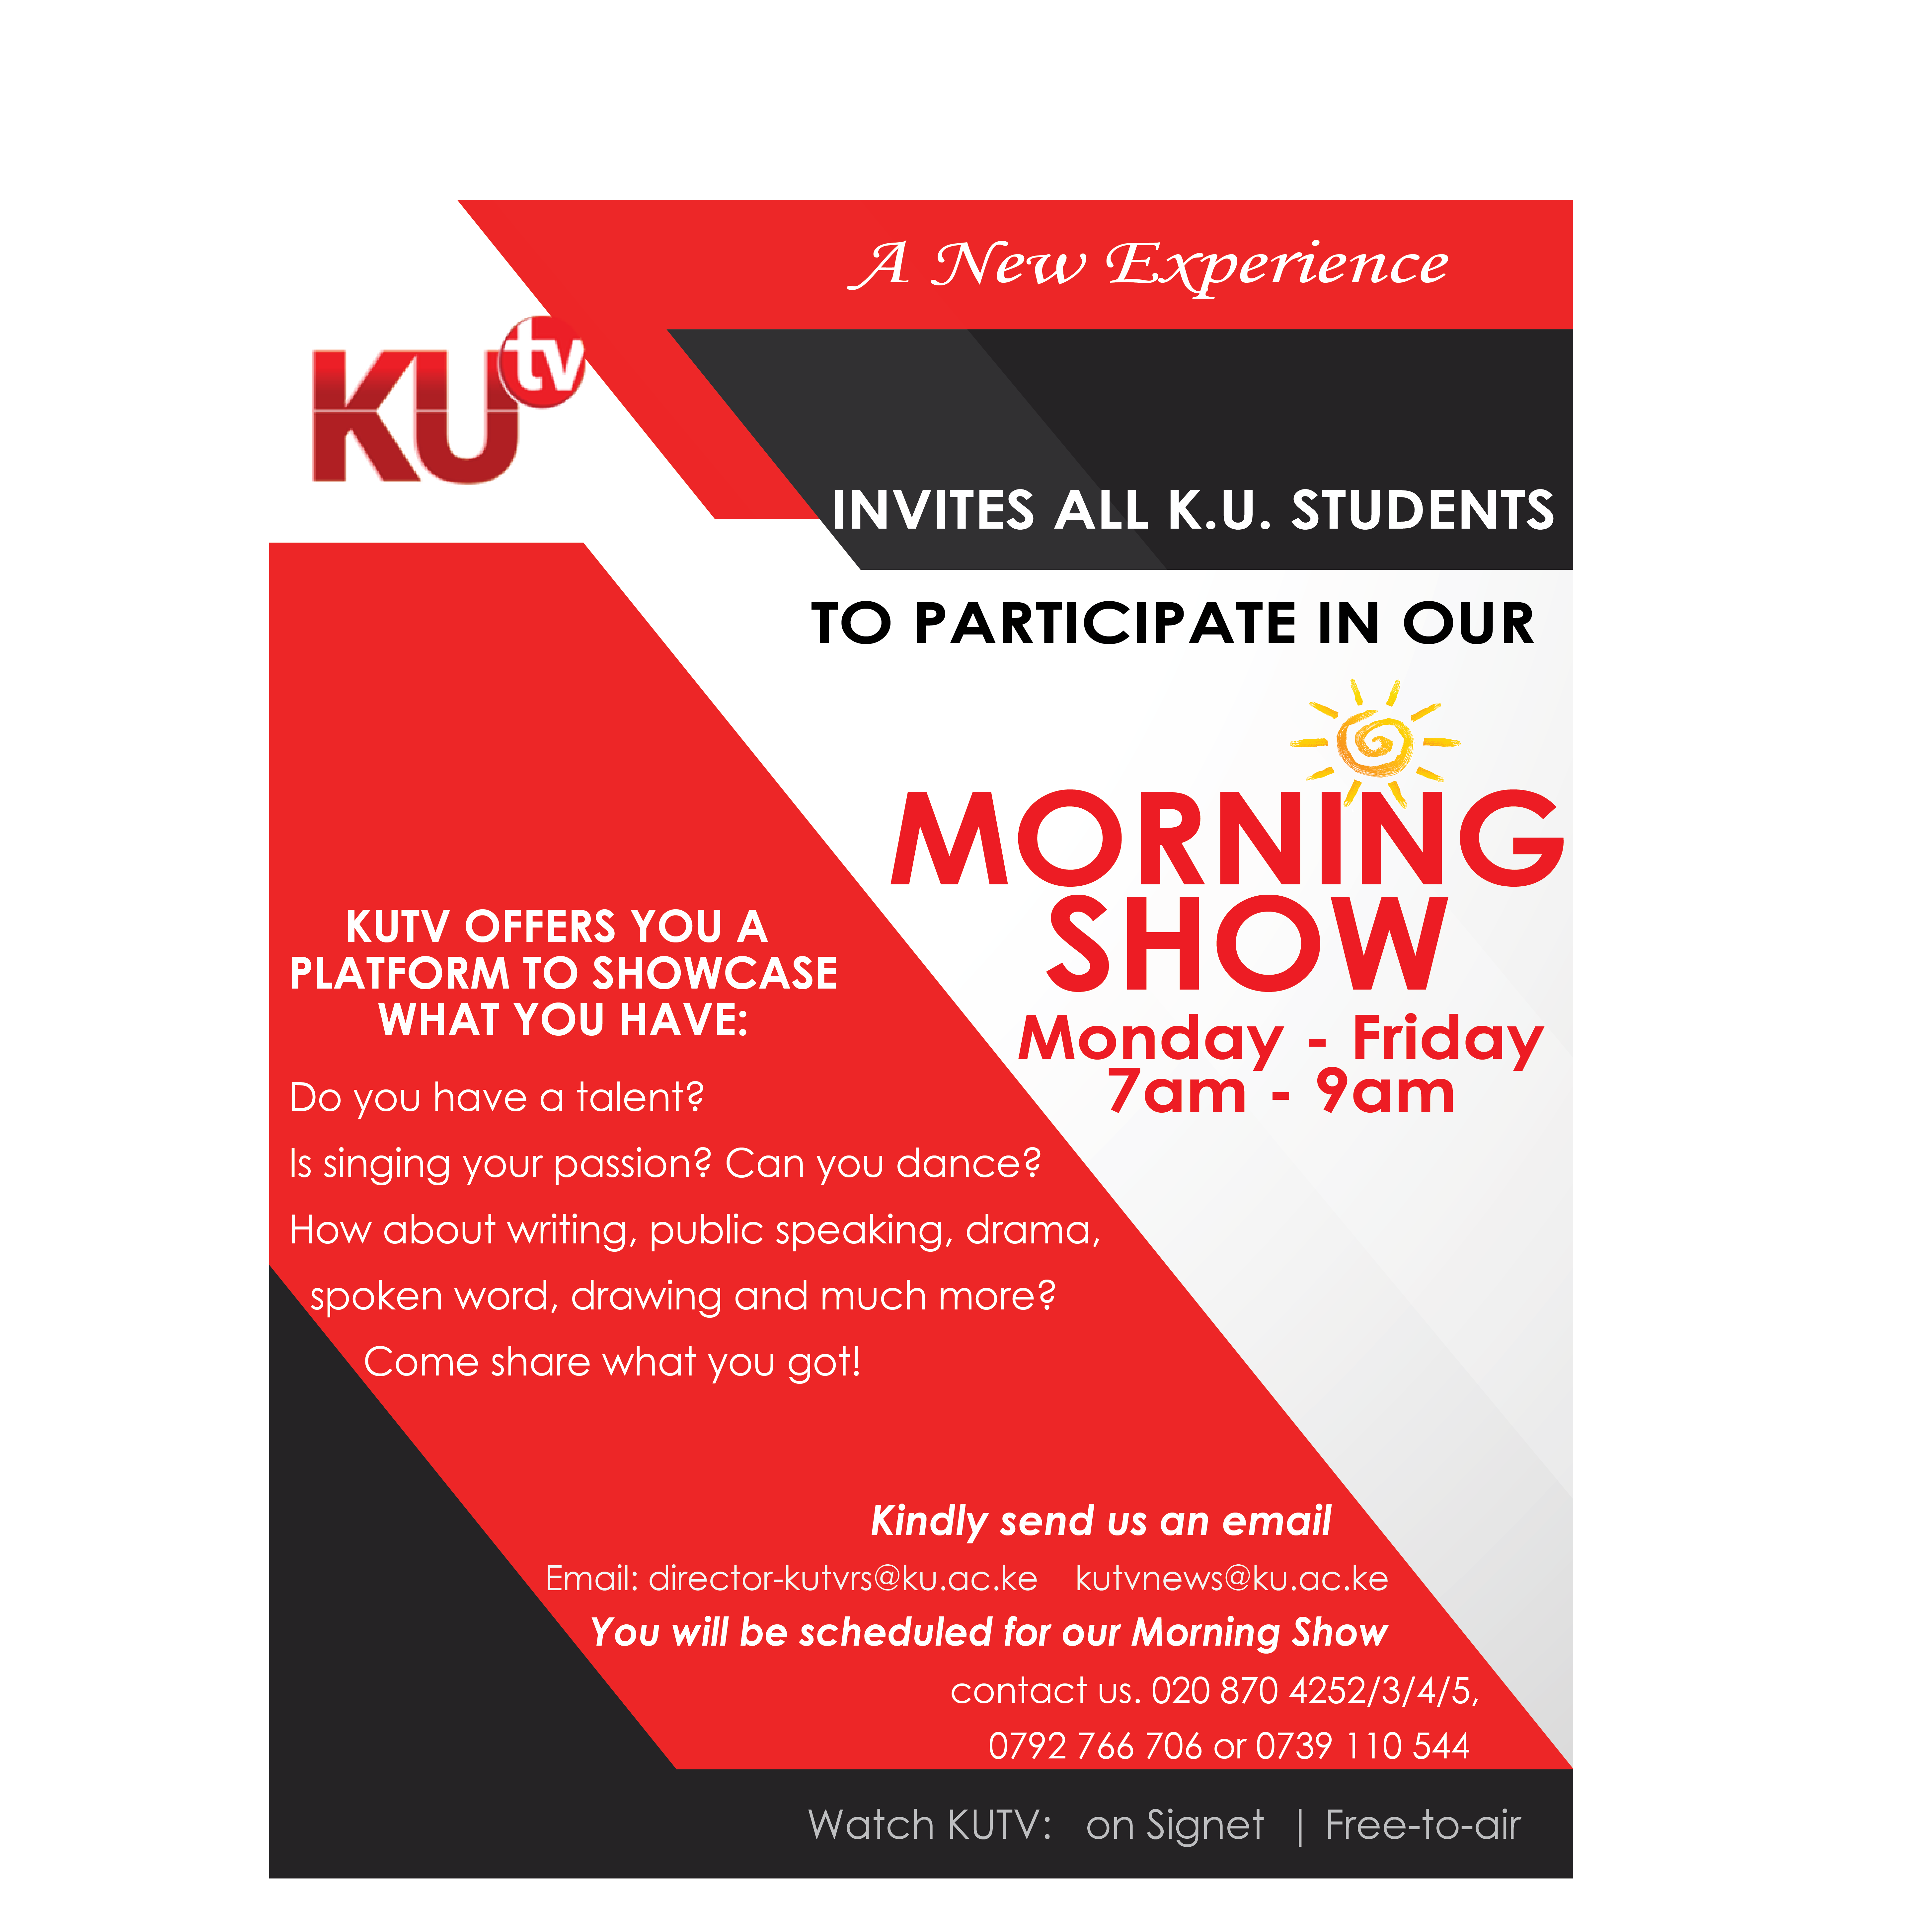 MORNING SHOW POSTER – FOR STUDENTS